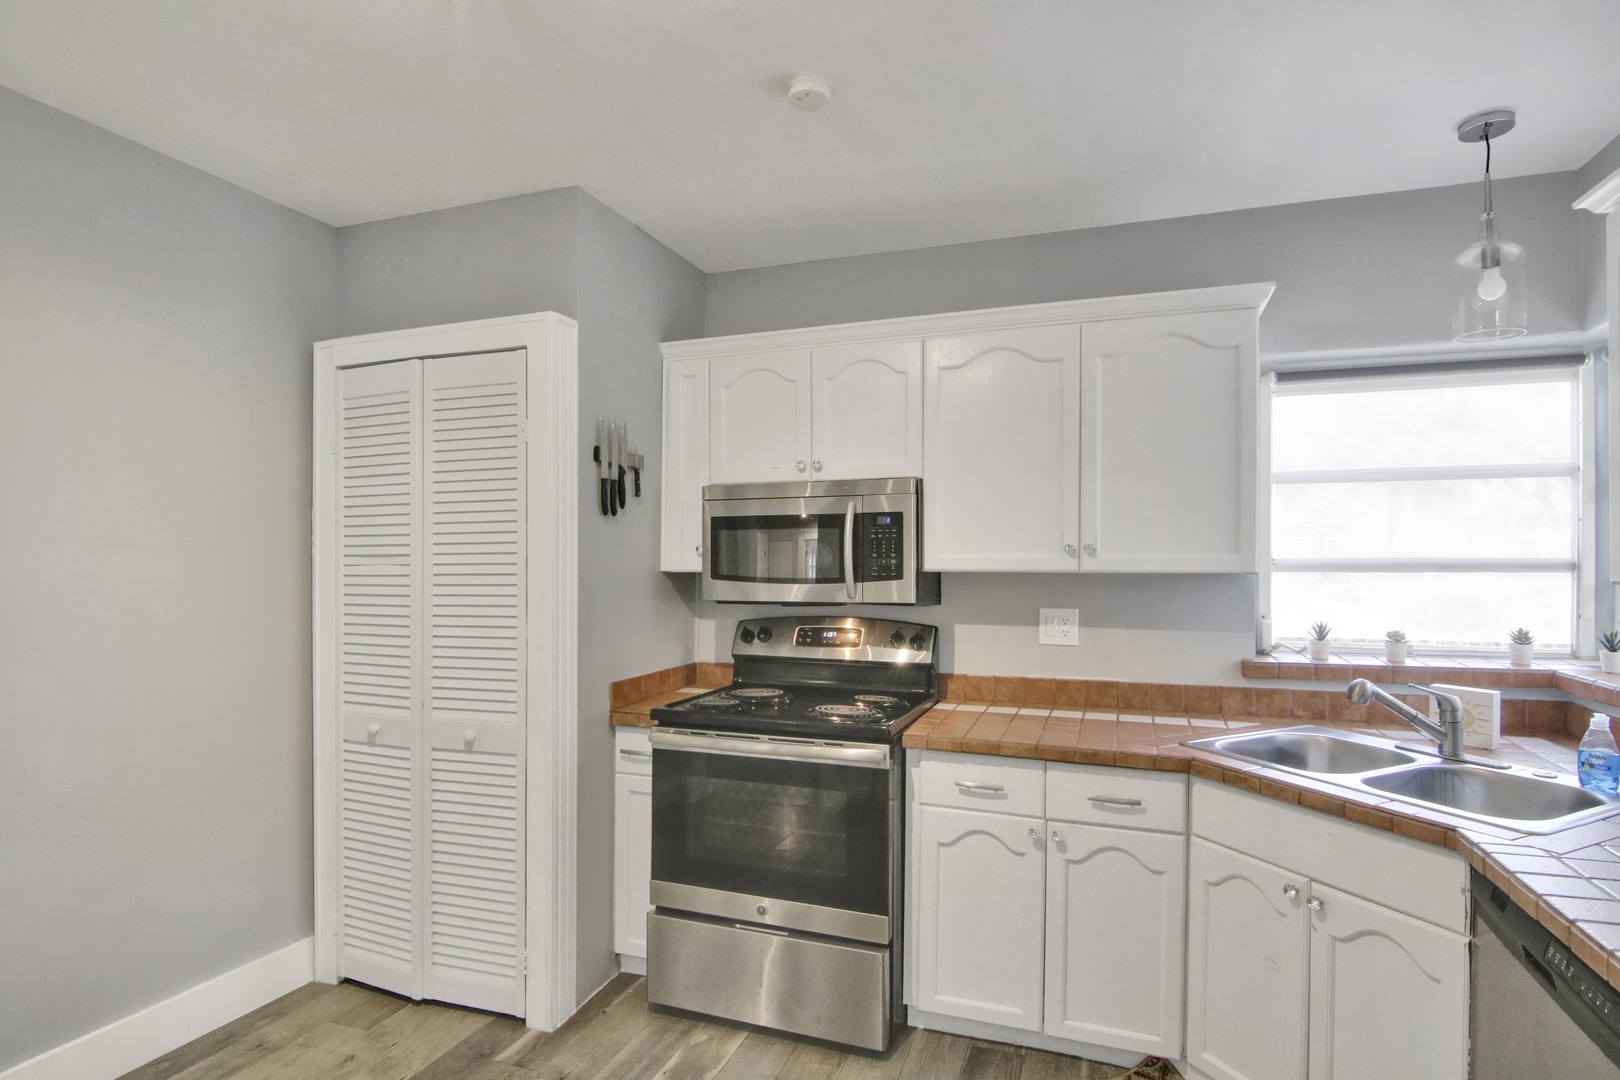 Unit 2: The cozy kitchen offers ample space & all the comforts of home